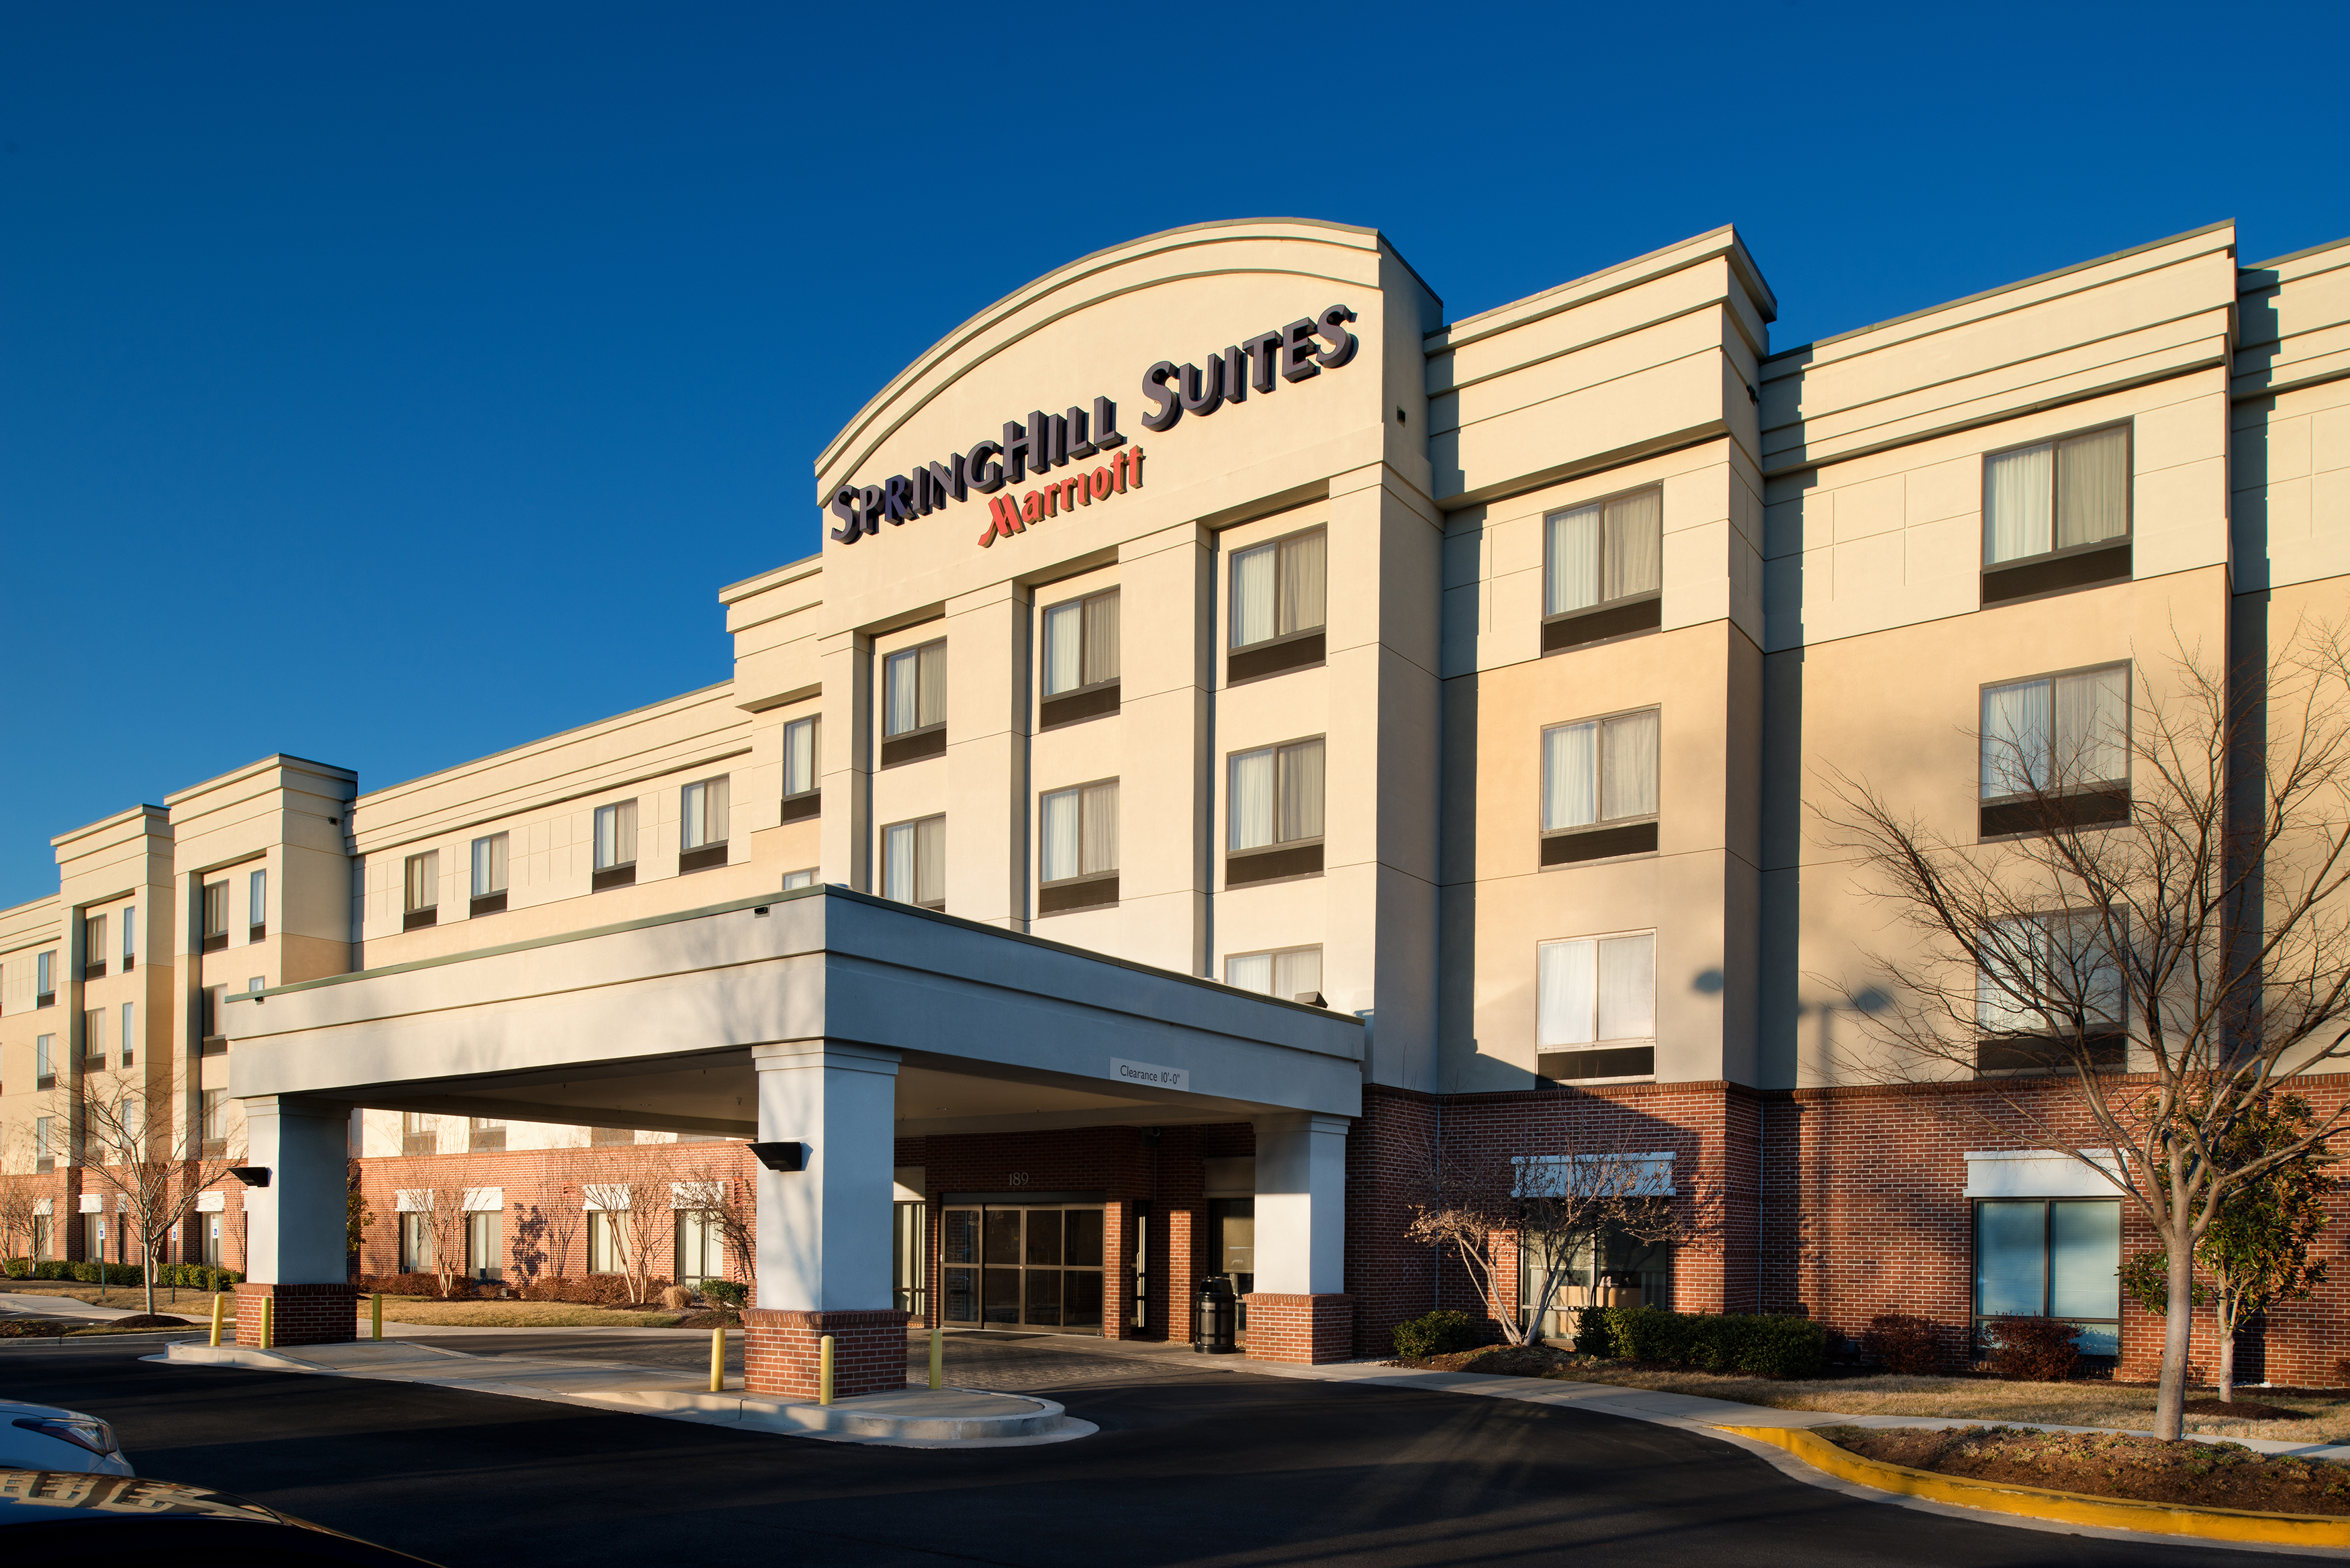 SpringHill Suites by Marriott Annapolis image